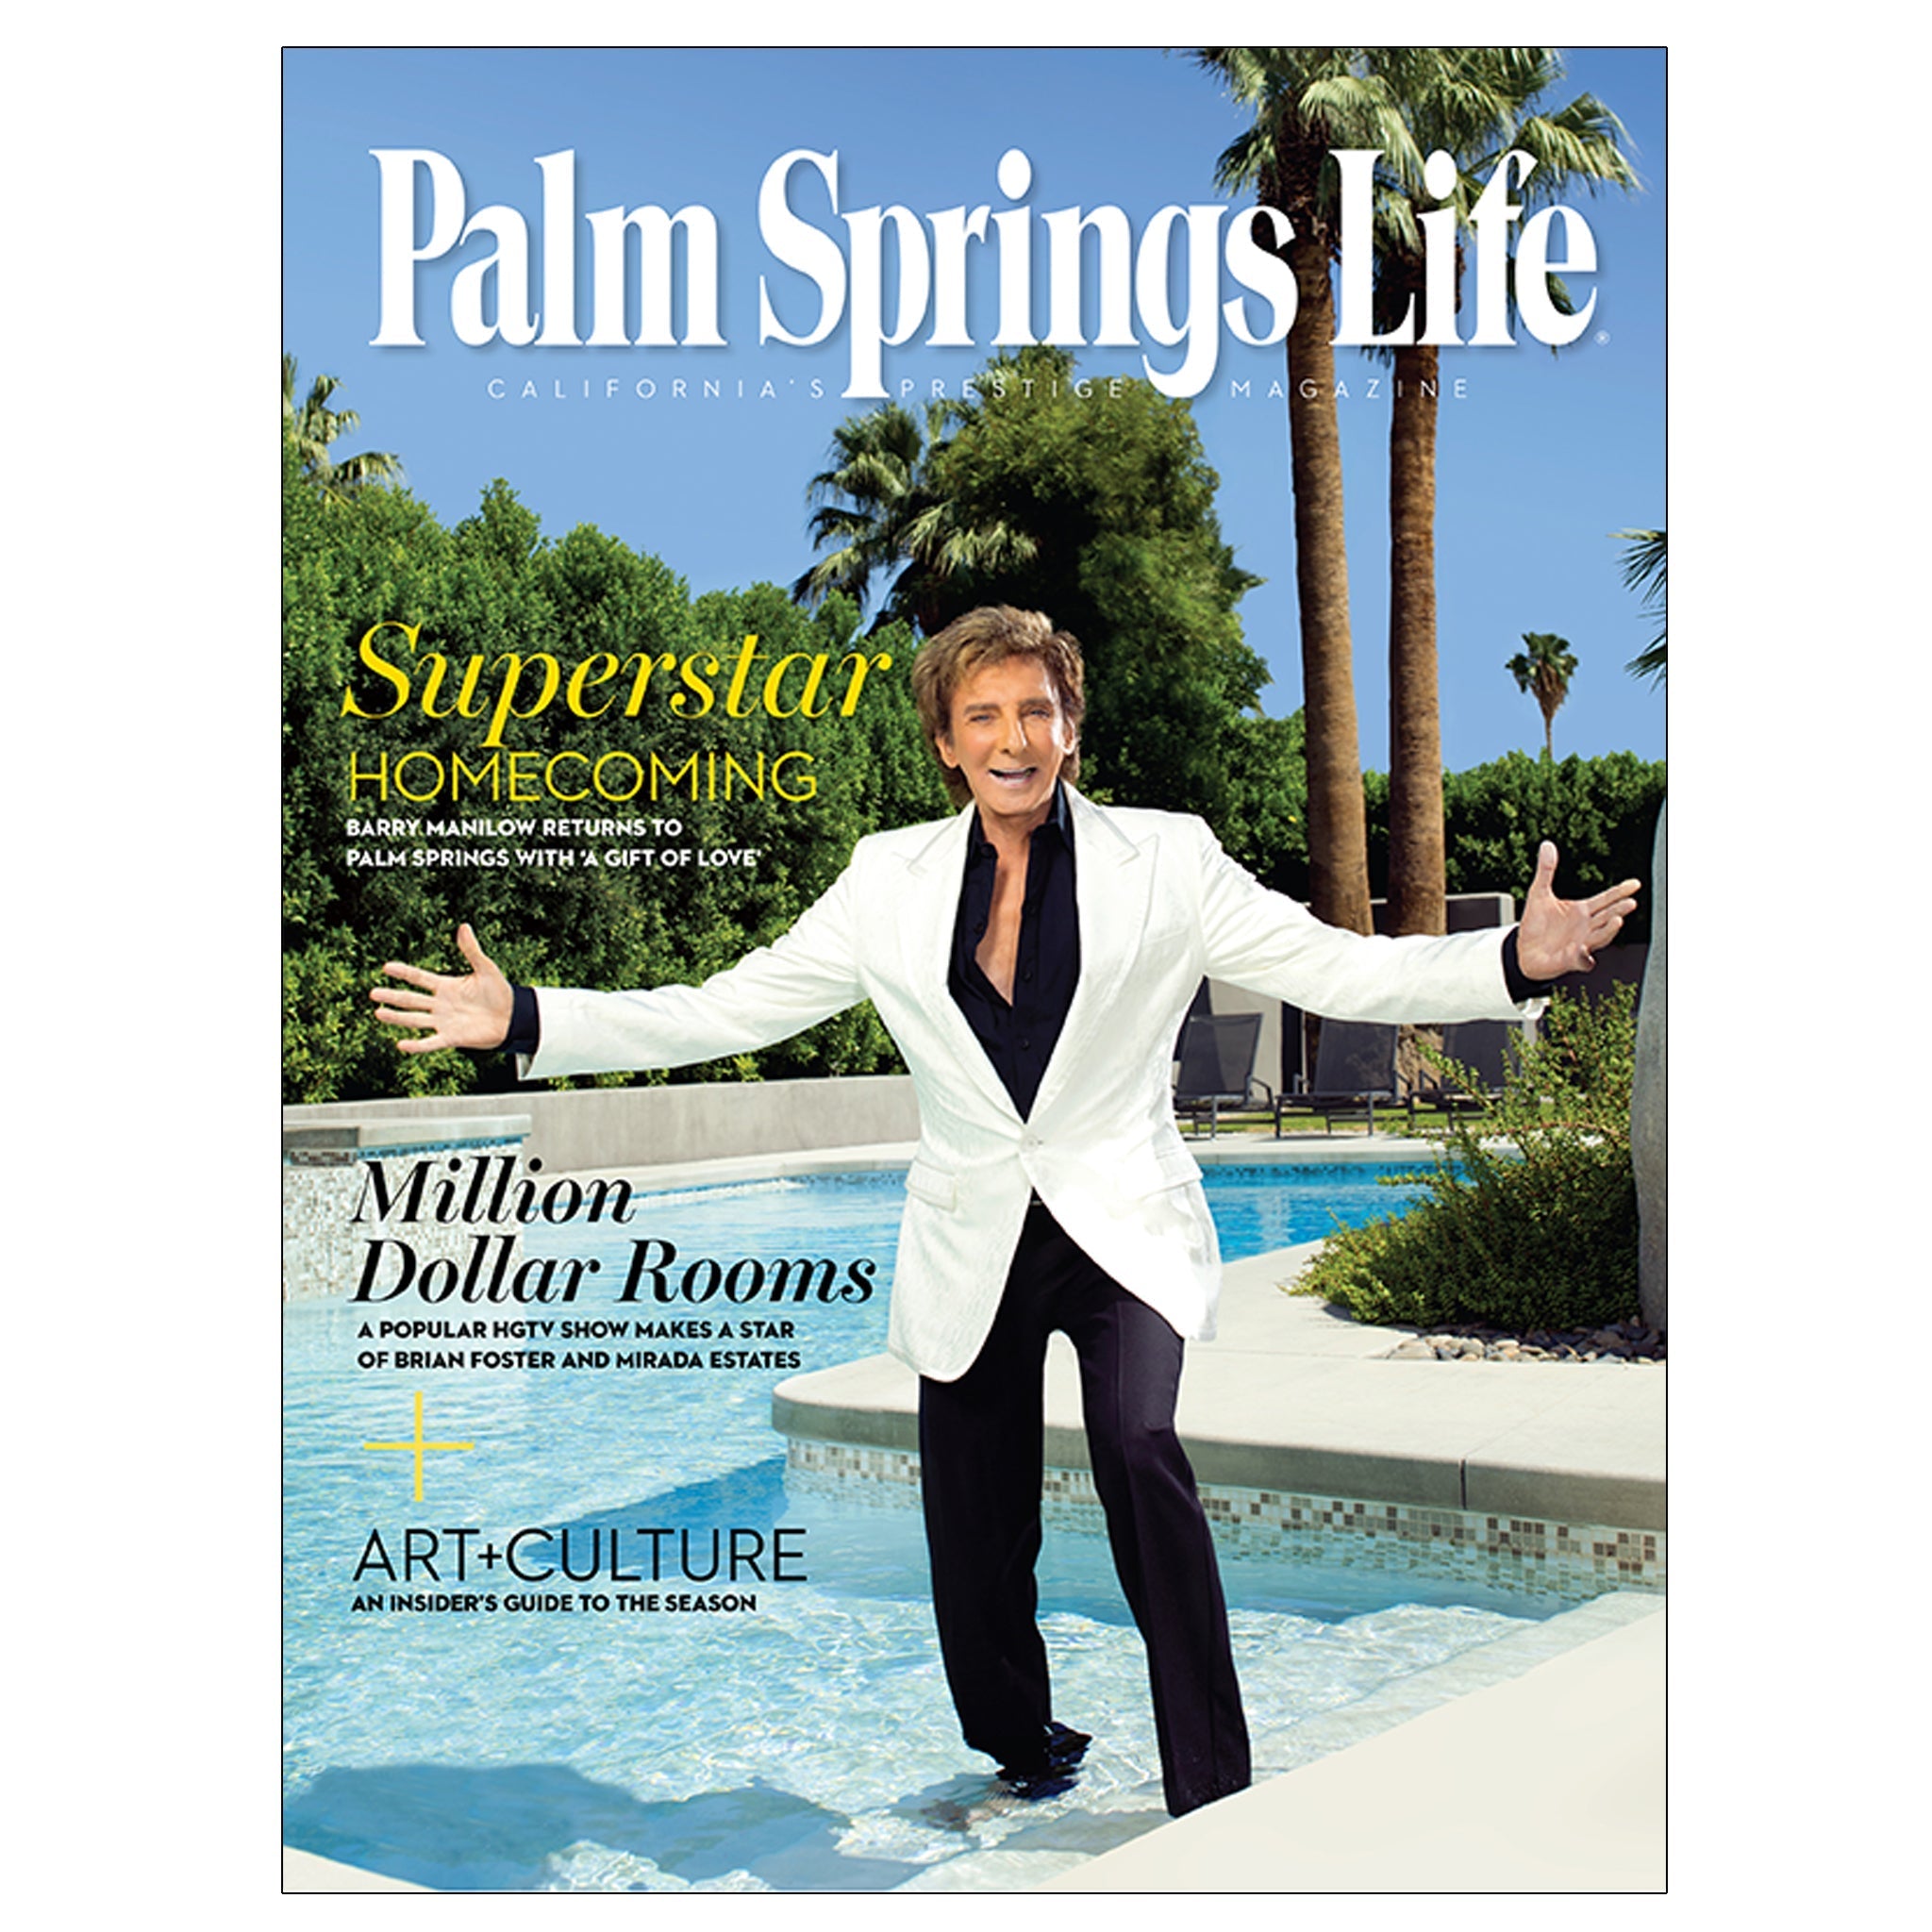 Palm Springs Life - December 2012 - Cover Poster